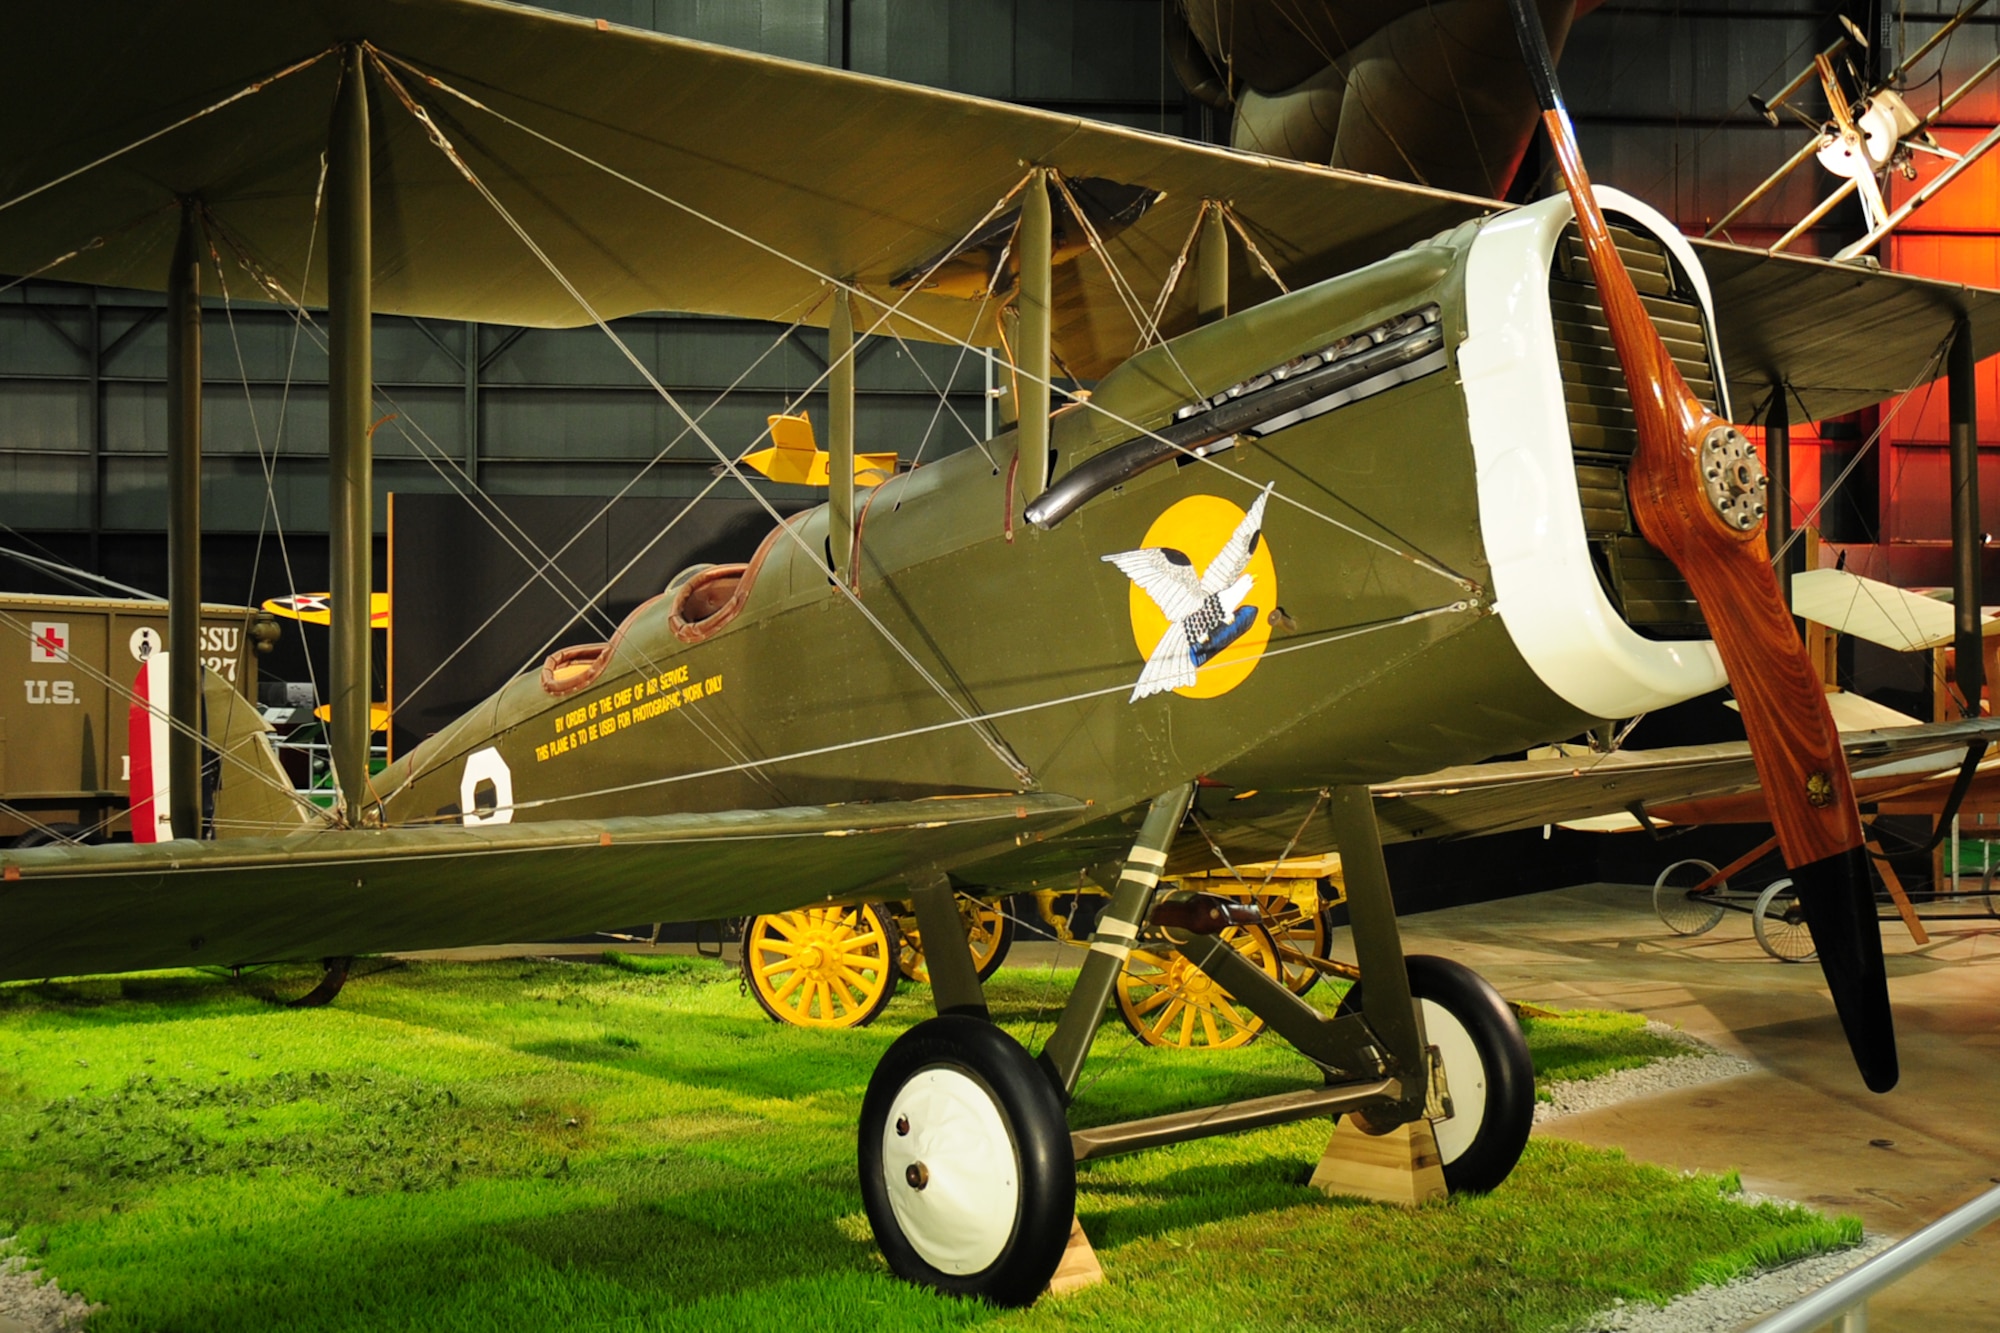 DAYTON, Ohio -- De Havilland DH-4 in the Early Years Gallery at the National Museum of the United States Air Force. (U.S. Air Force photo)